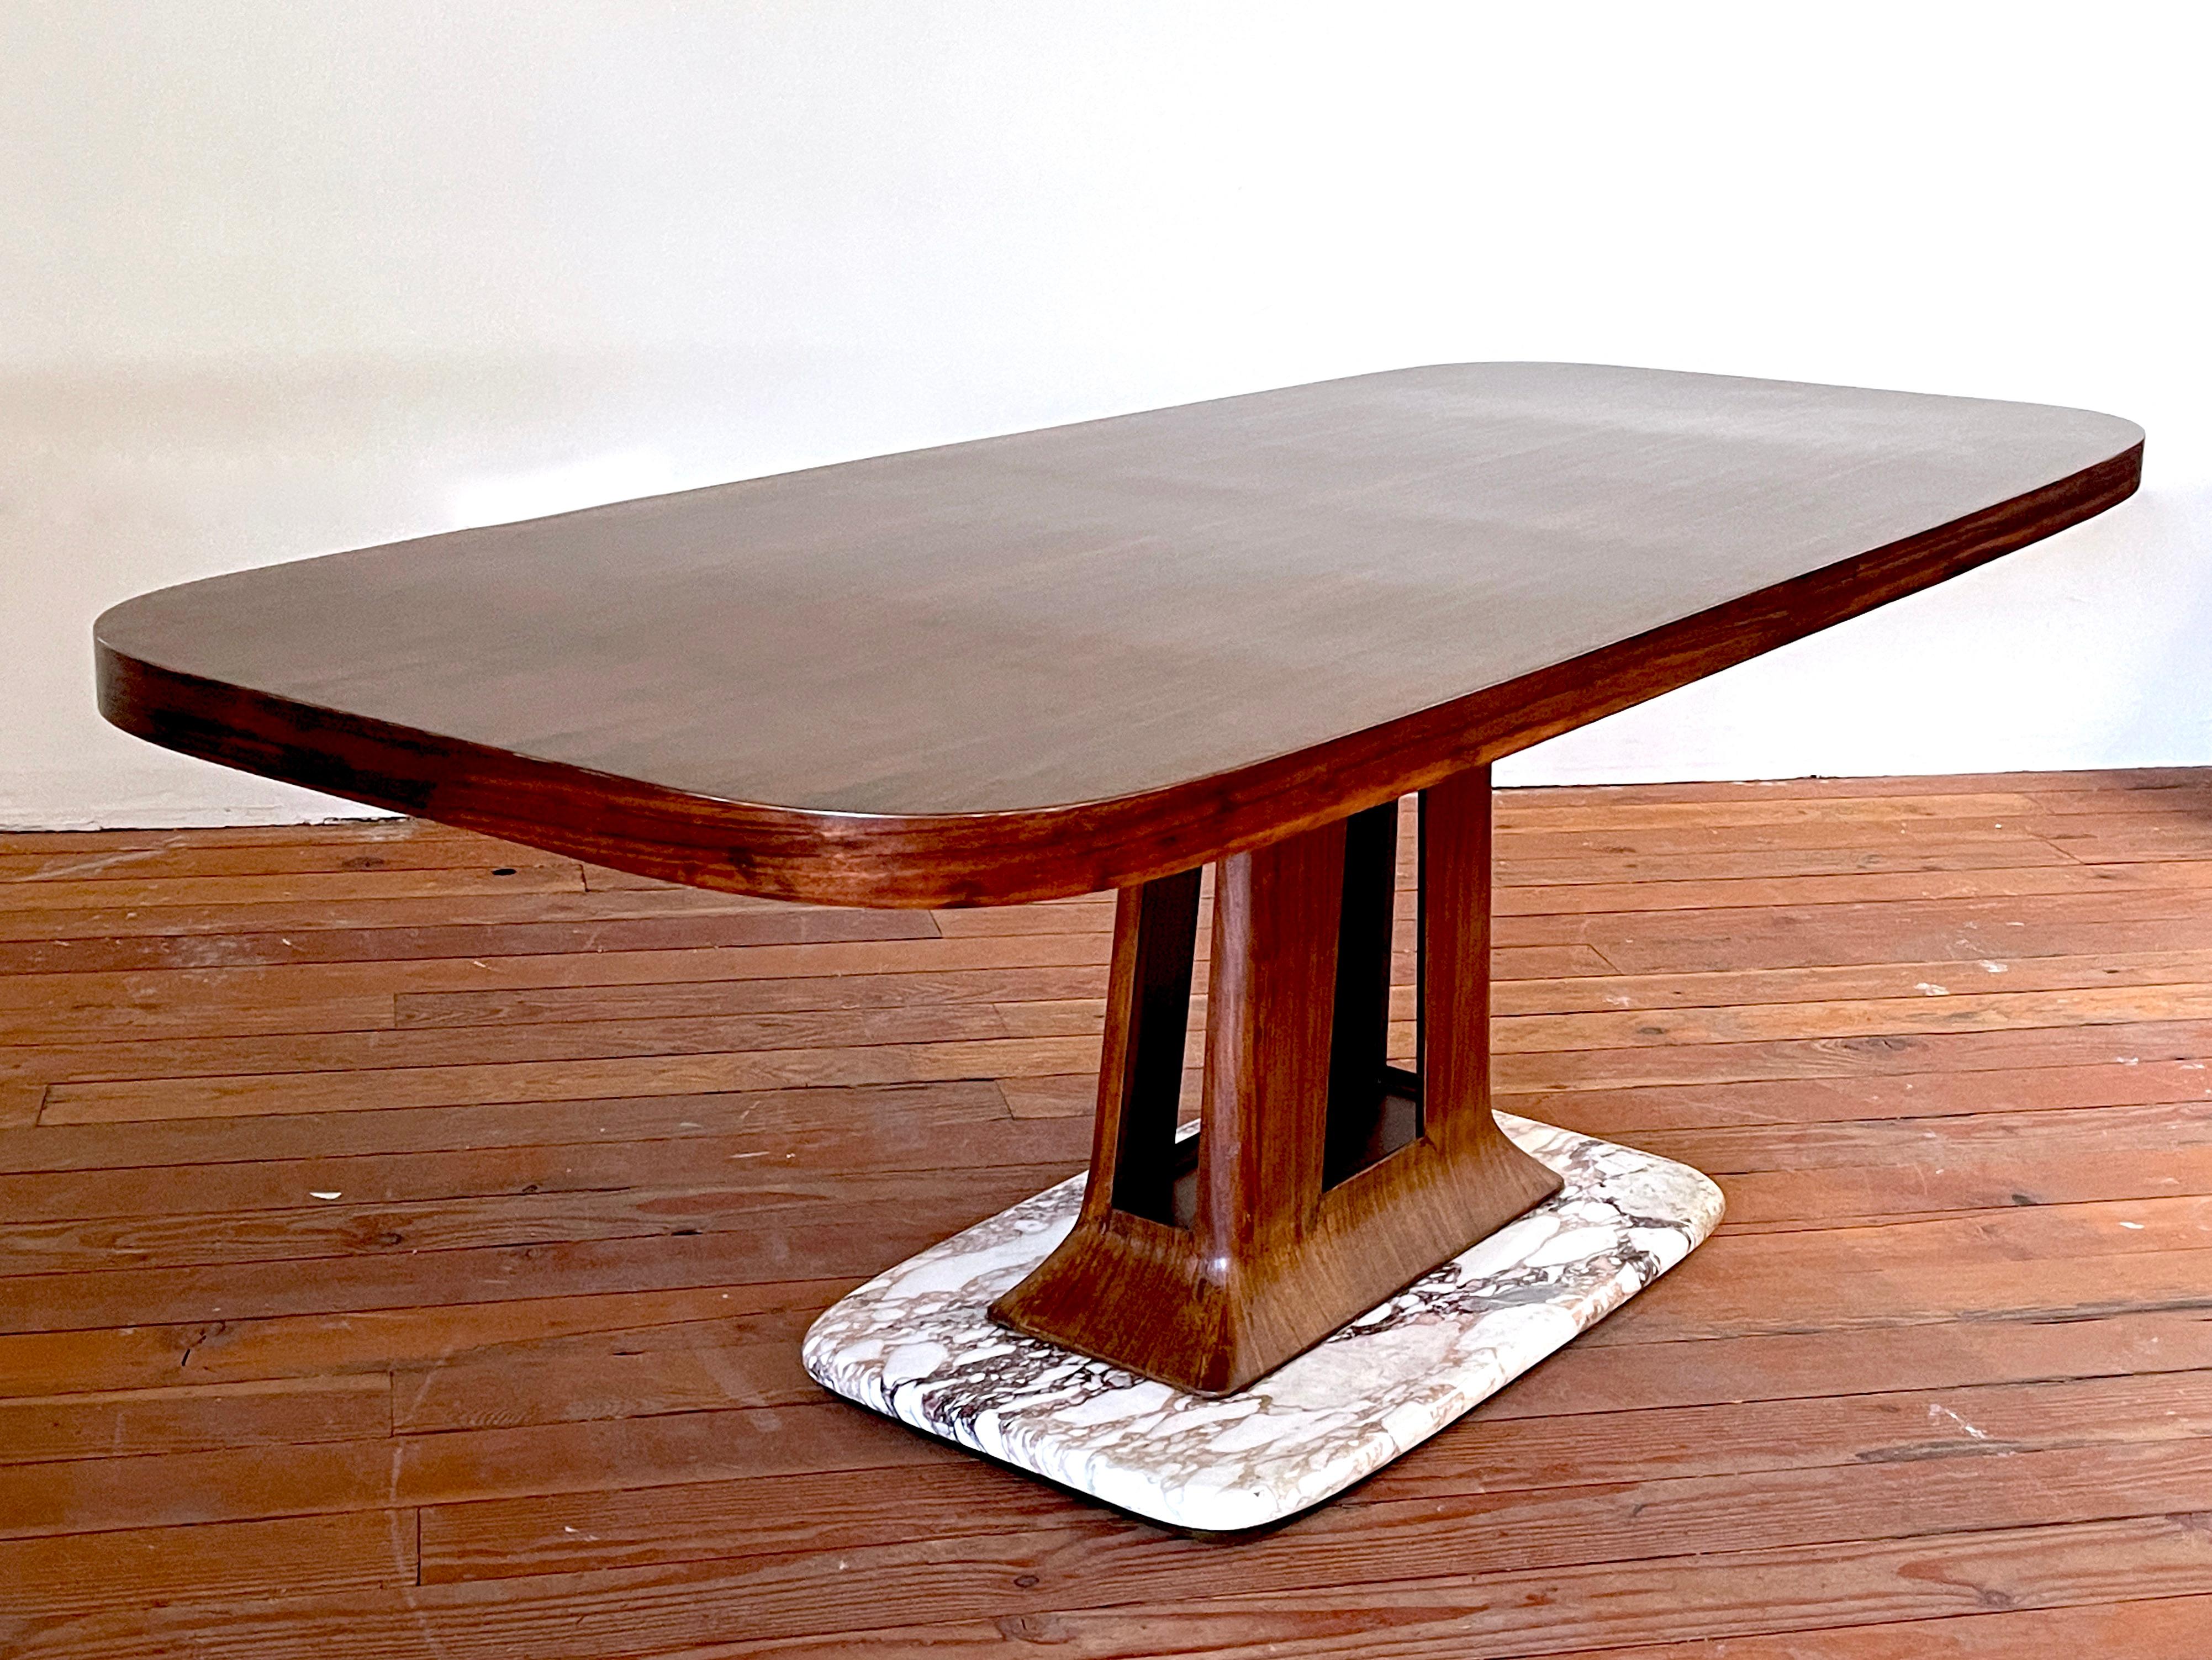 Incredible Art Deco rosewood dining or center table with sculpted rosewood pedestal and marble base. 
Newly refinished and restored. 
Gorgeous piece.